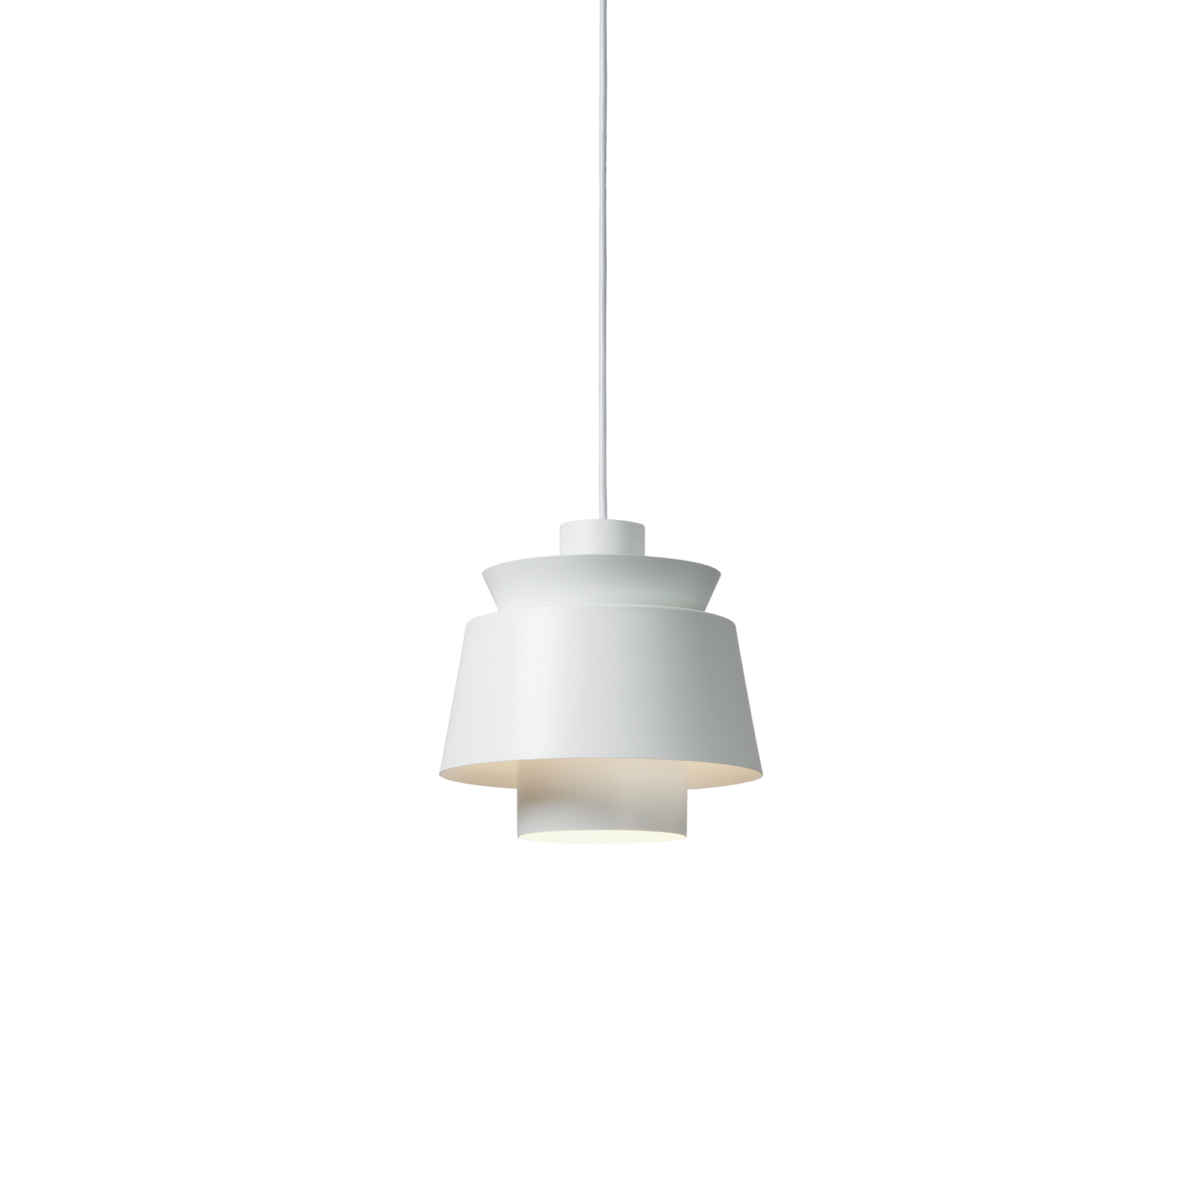 White Utzon Pendant Light with a diameter of 9.8 inches and a height of 9.8 inches, equivalent to 25cm x 25cm.